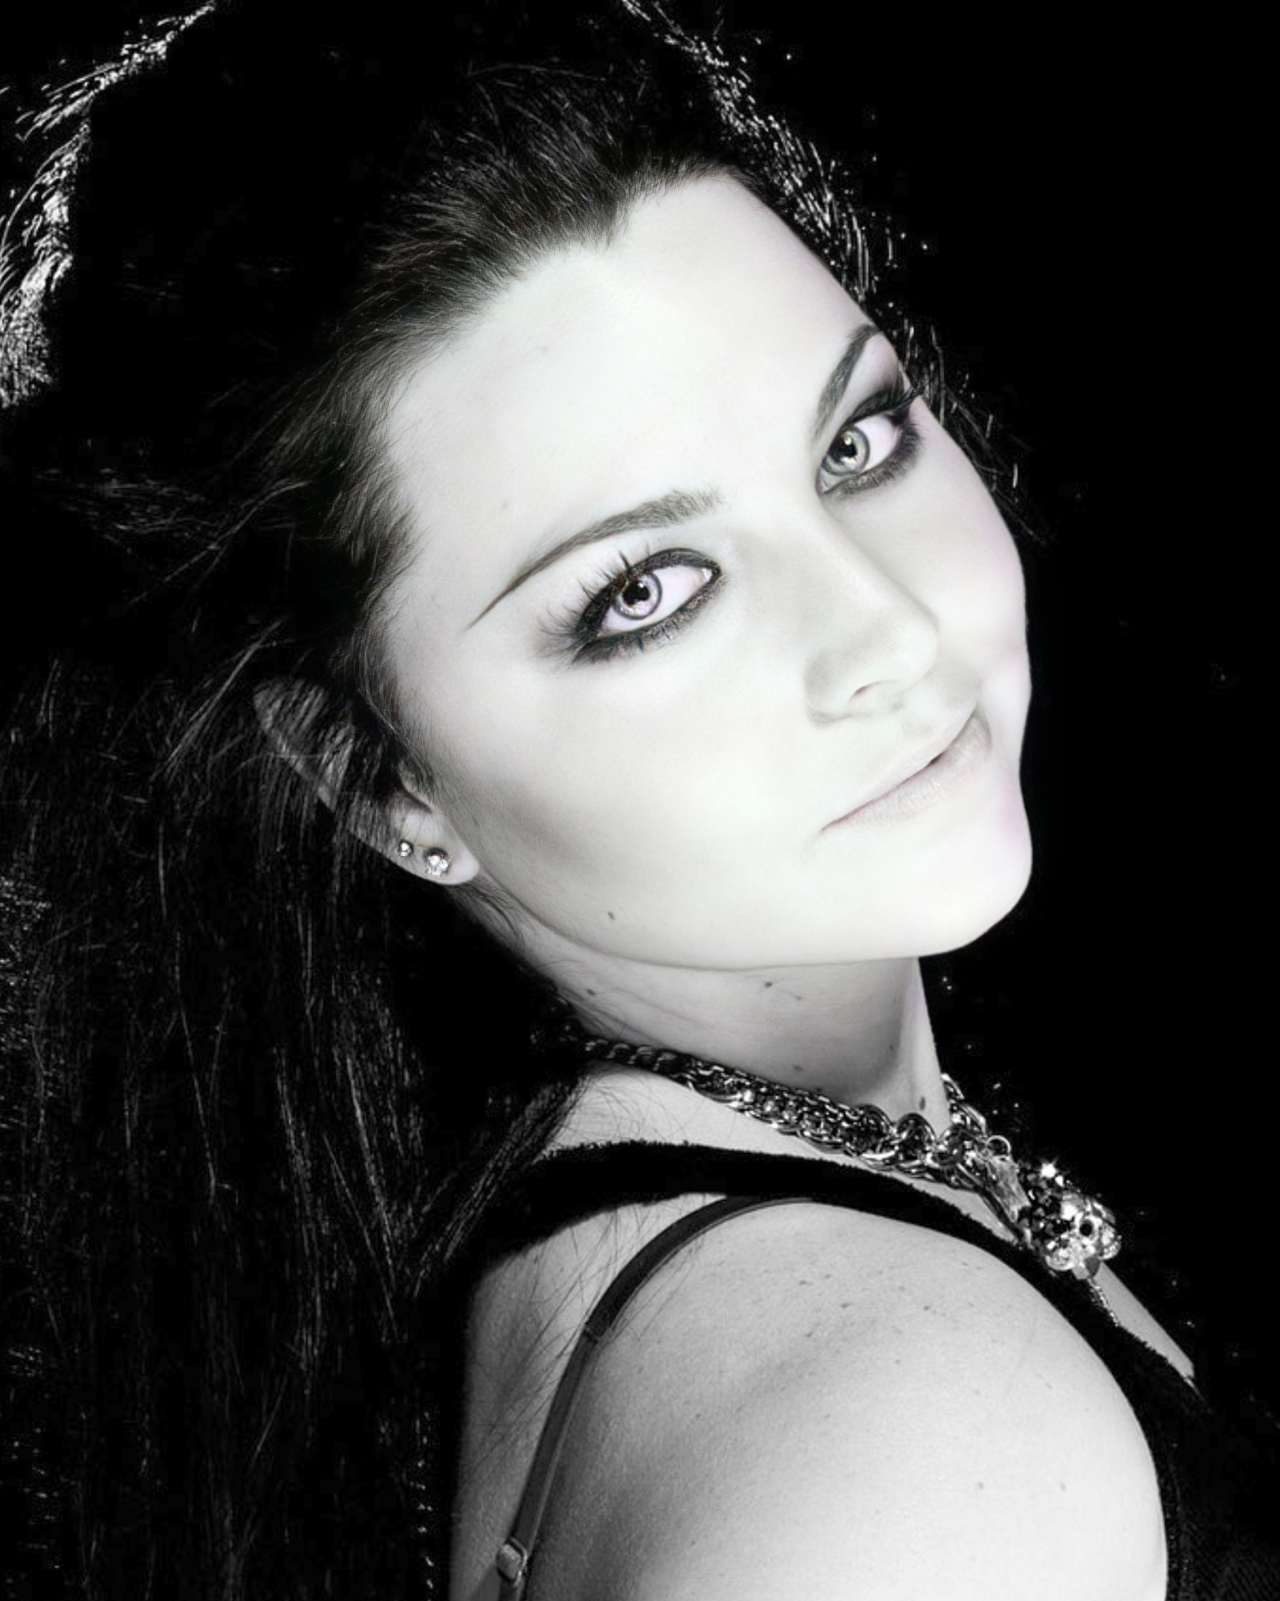 1280x1601
Keywords: amy lee;hq;photoshoot;the open door;2006;sesion